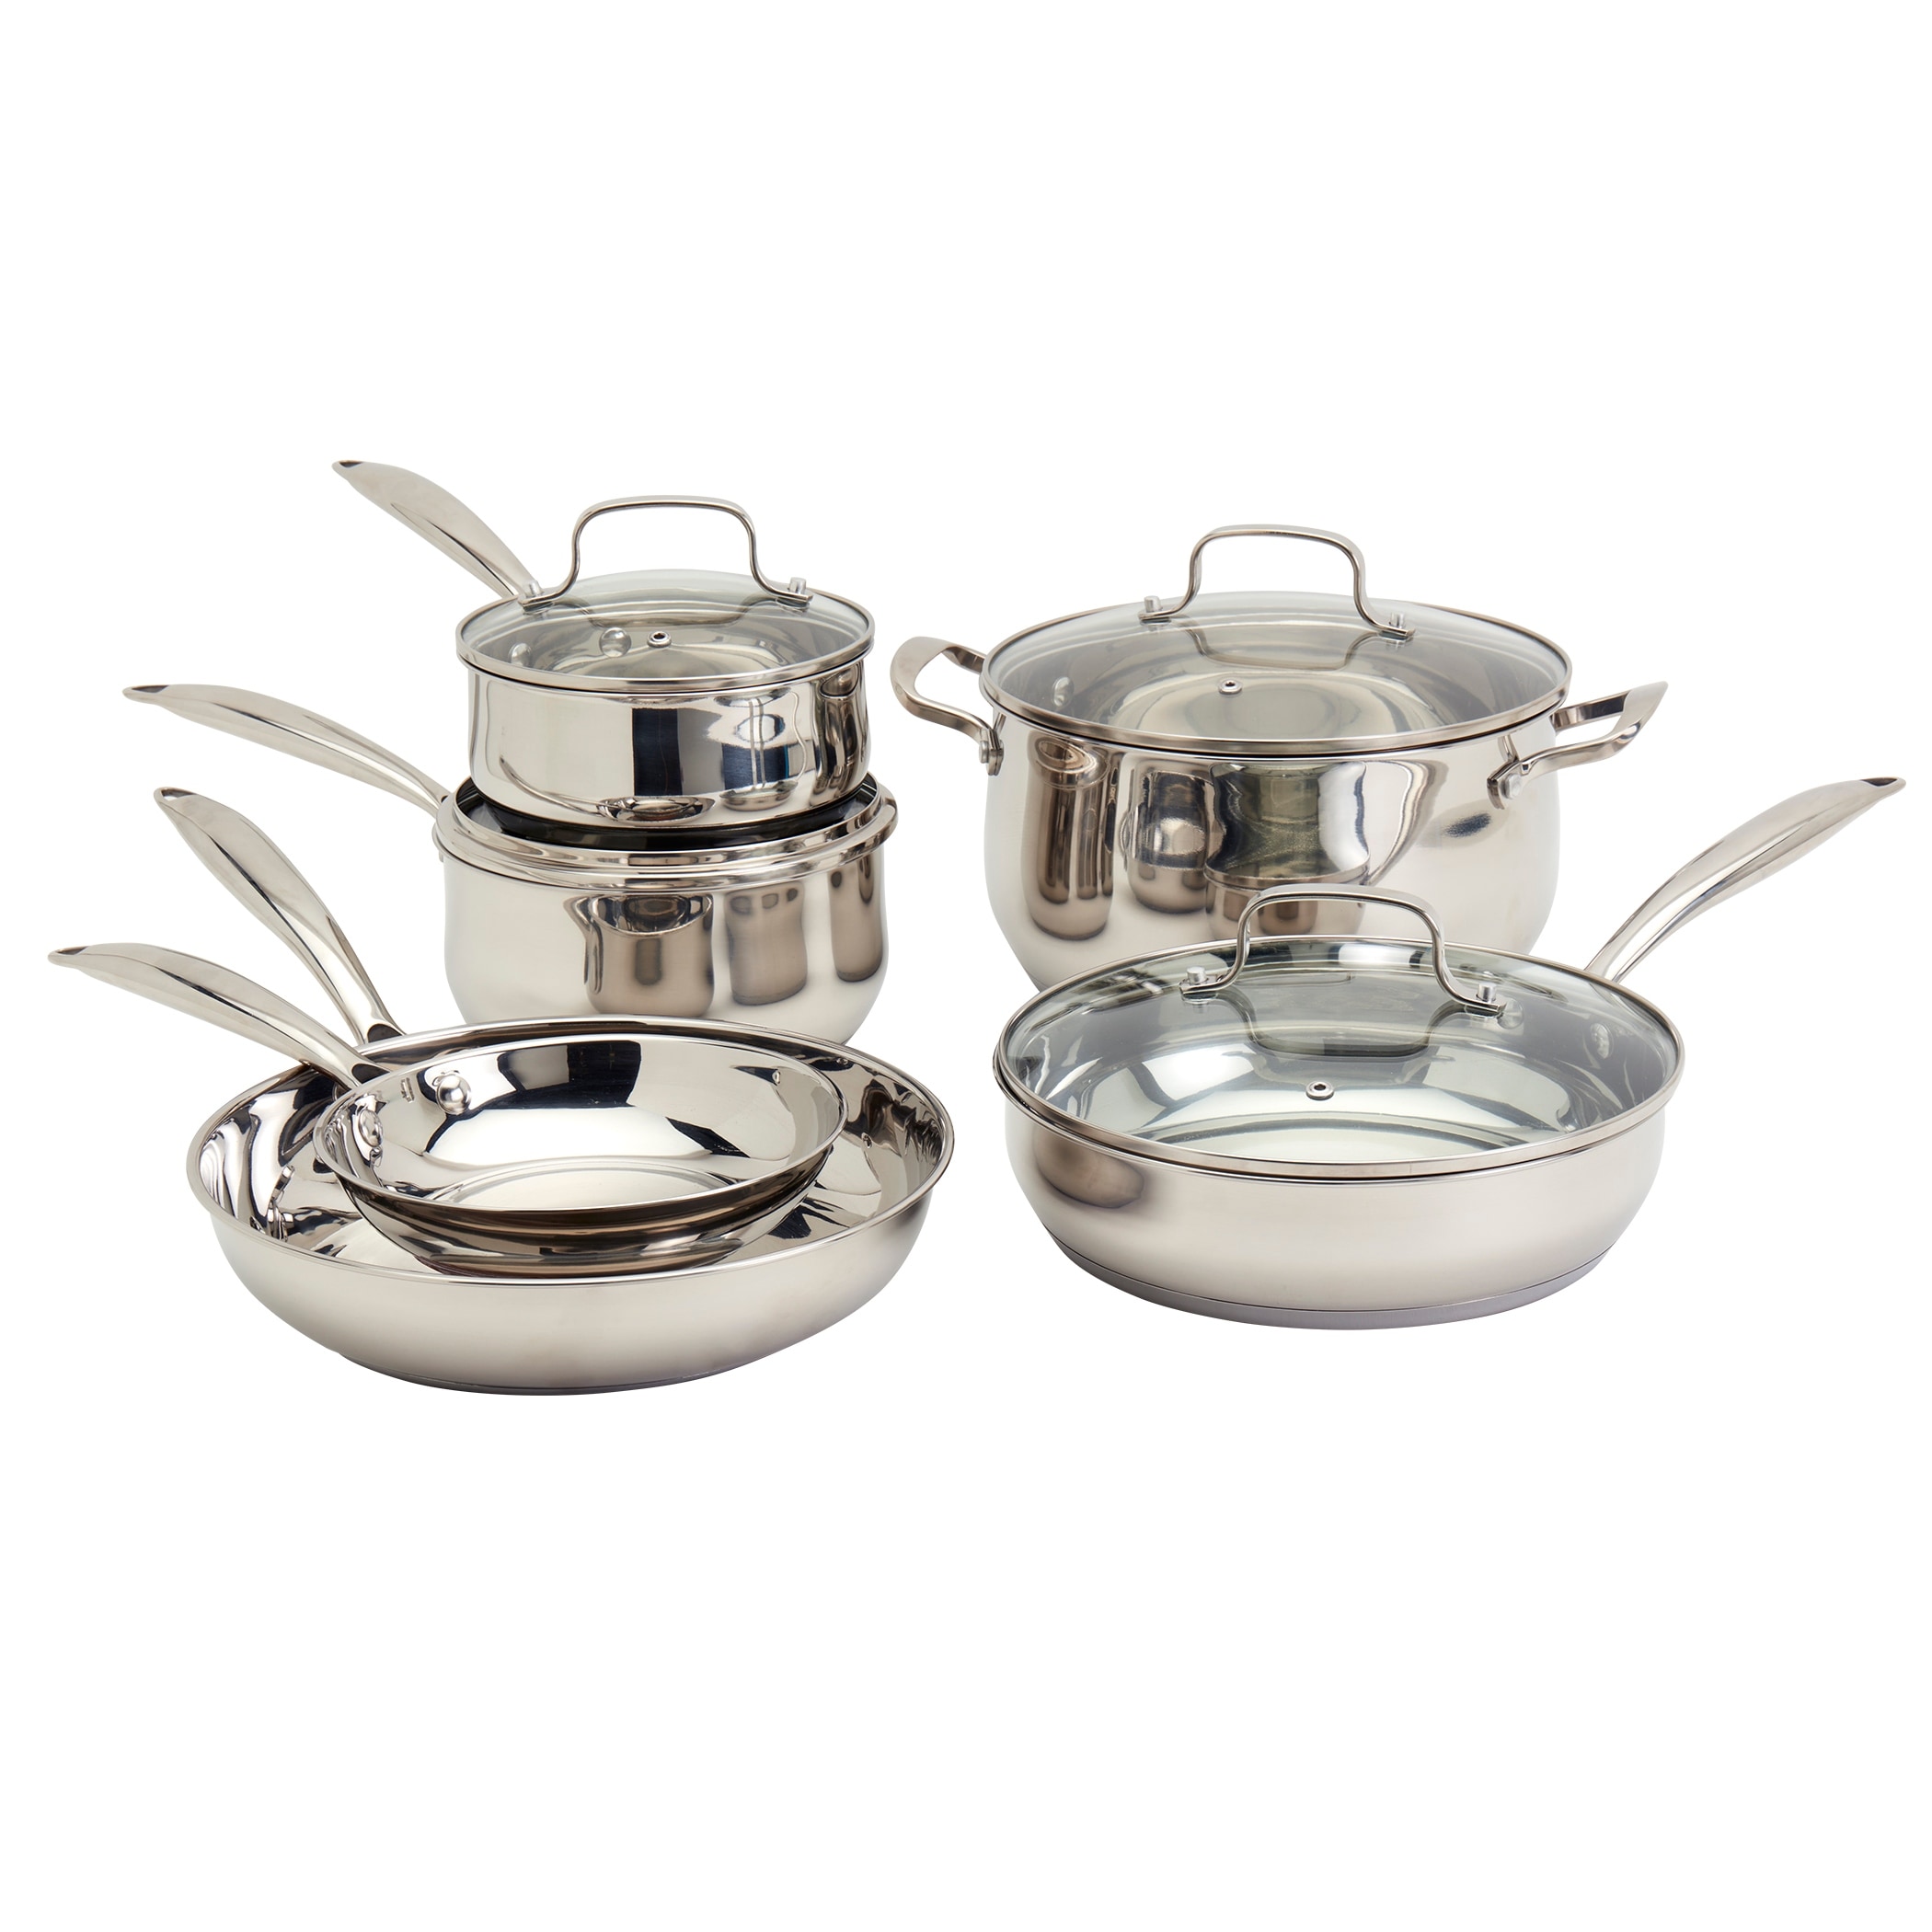 https://ak1.ostkcdn.com/images/products/is/images/direct/30982413a3d86b02c0585d8b1187a50233cba4f3/Denmark-10pc-Stainless-Steel-Cookware-Set.jpg